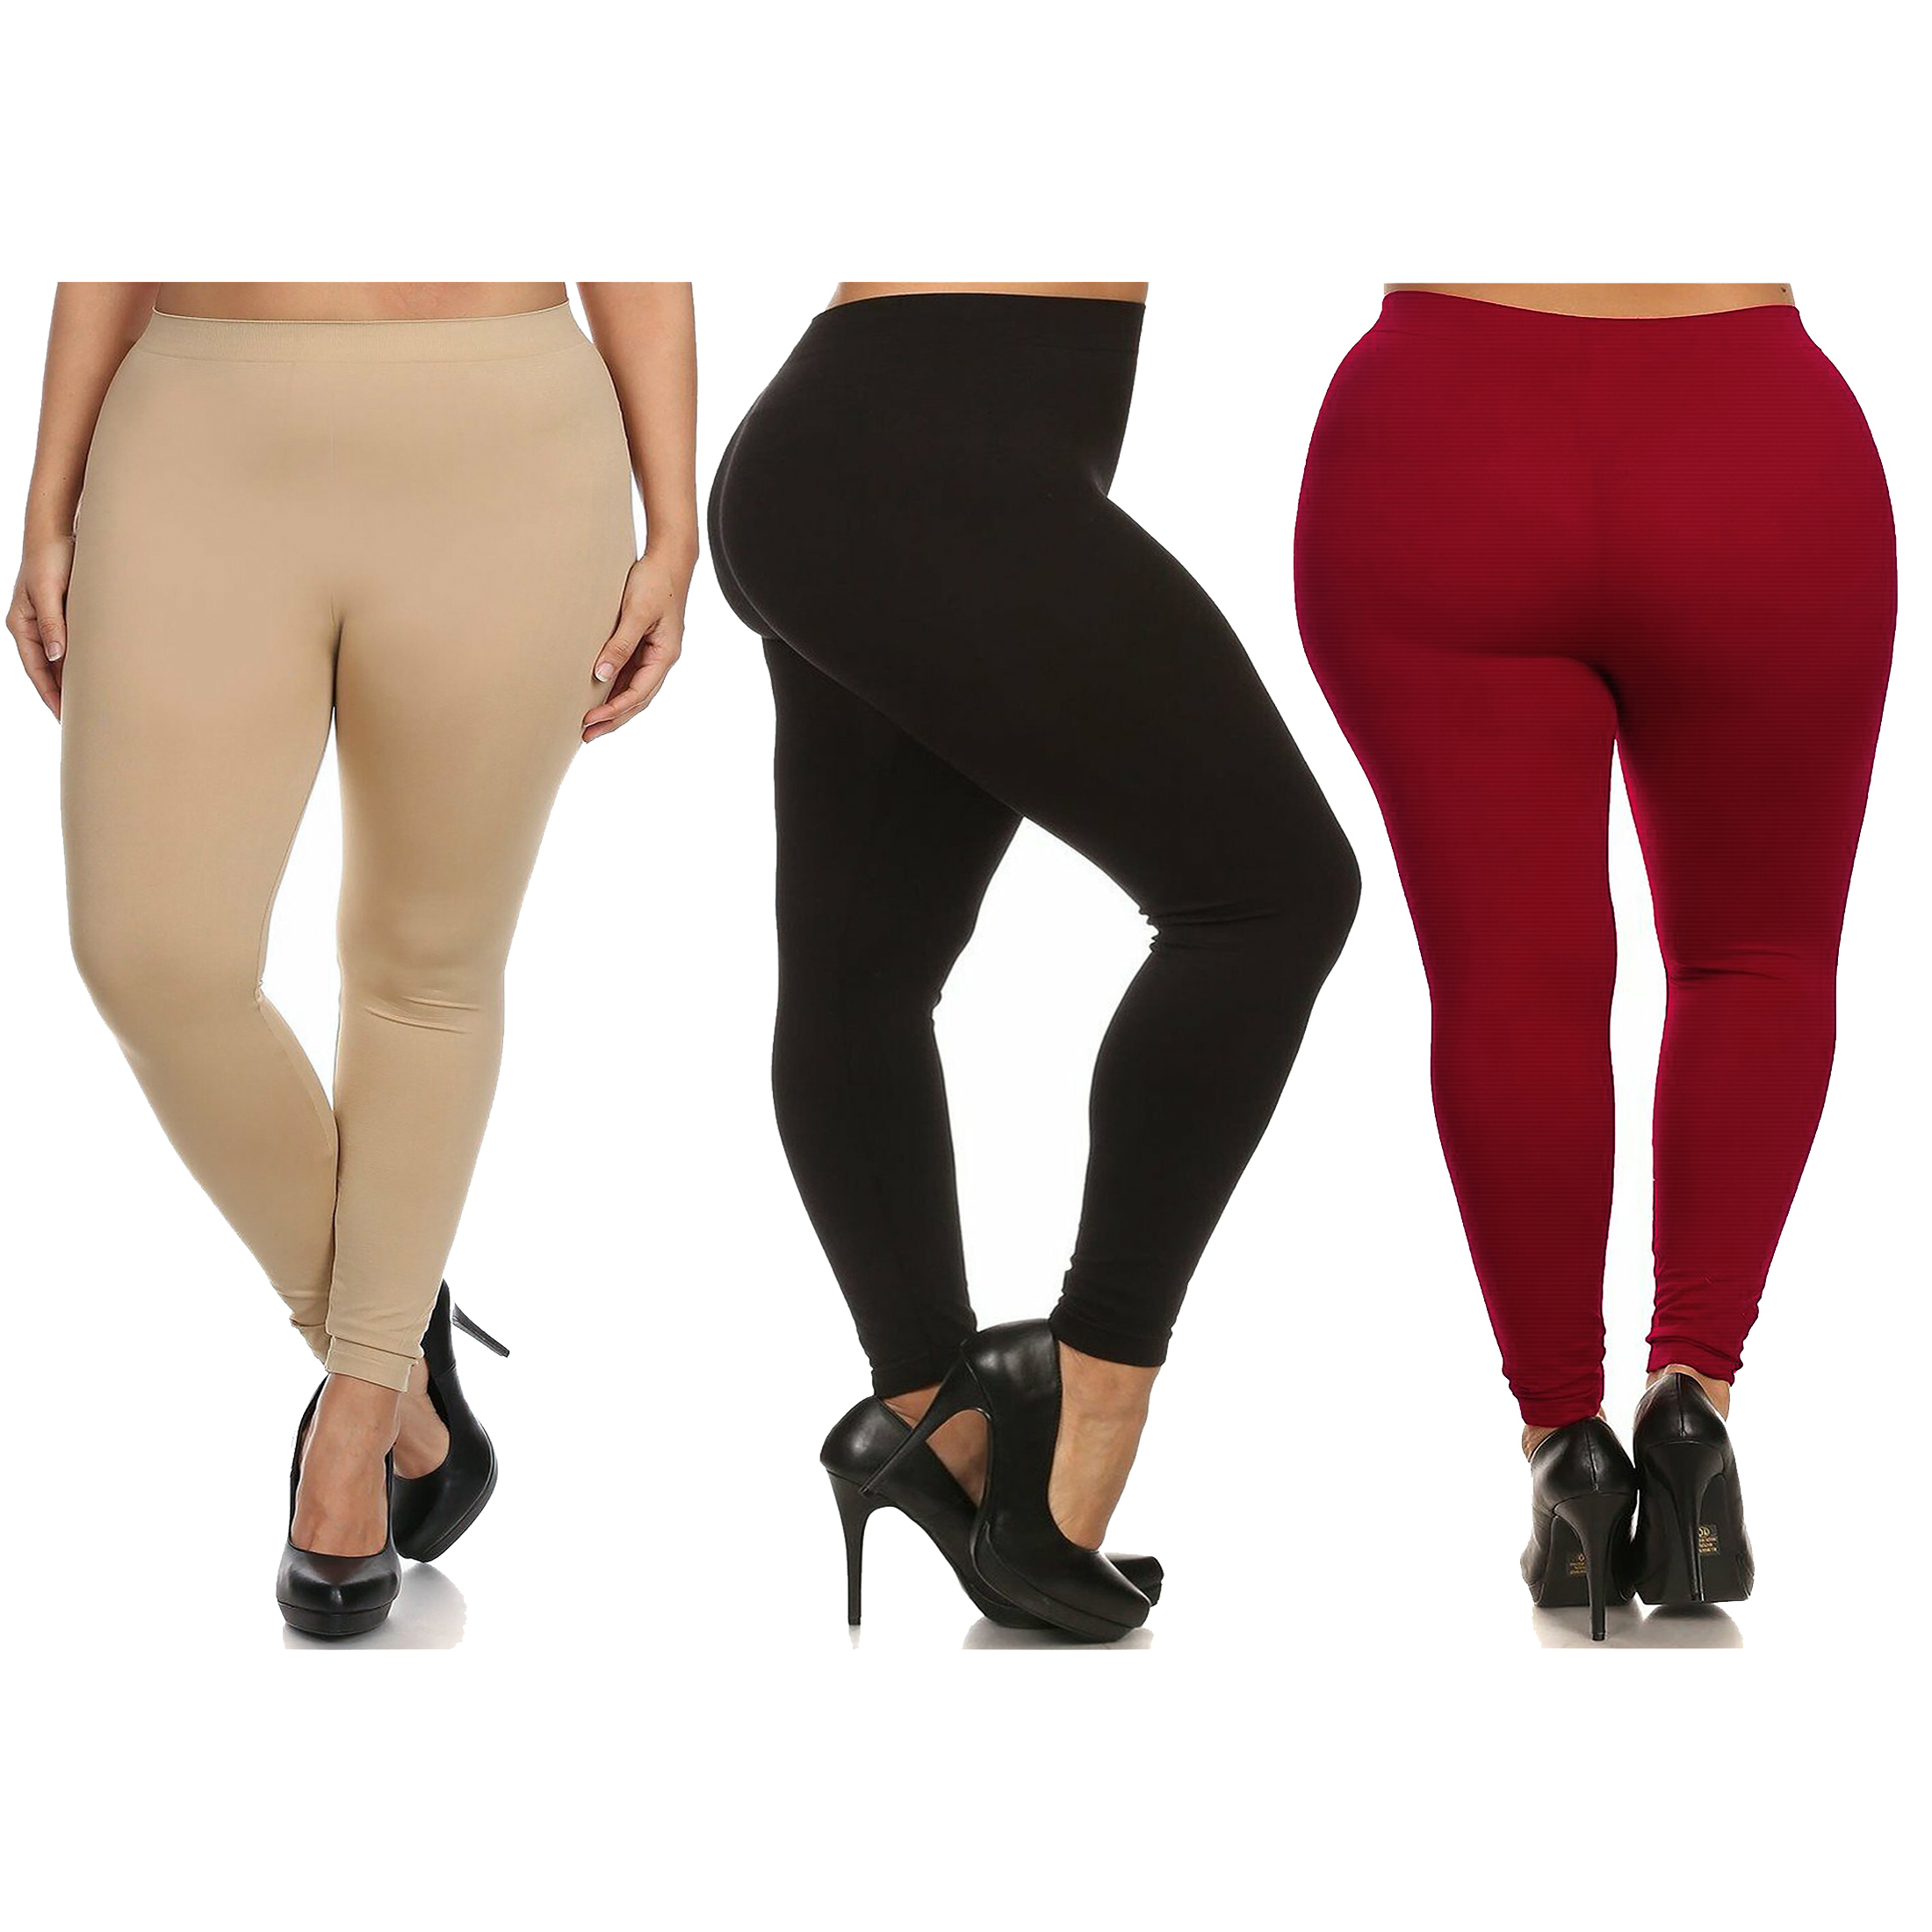 Multi-Pack: Plus Size Women's Casual Ultra-Soft Workout Yoga Leggings - 3 Pack